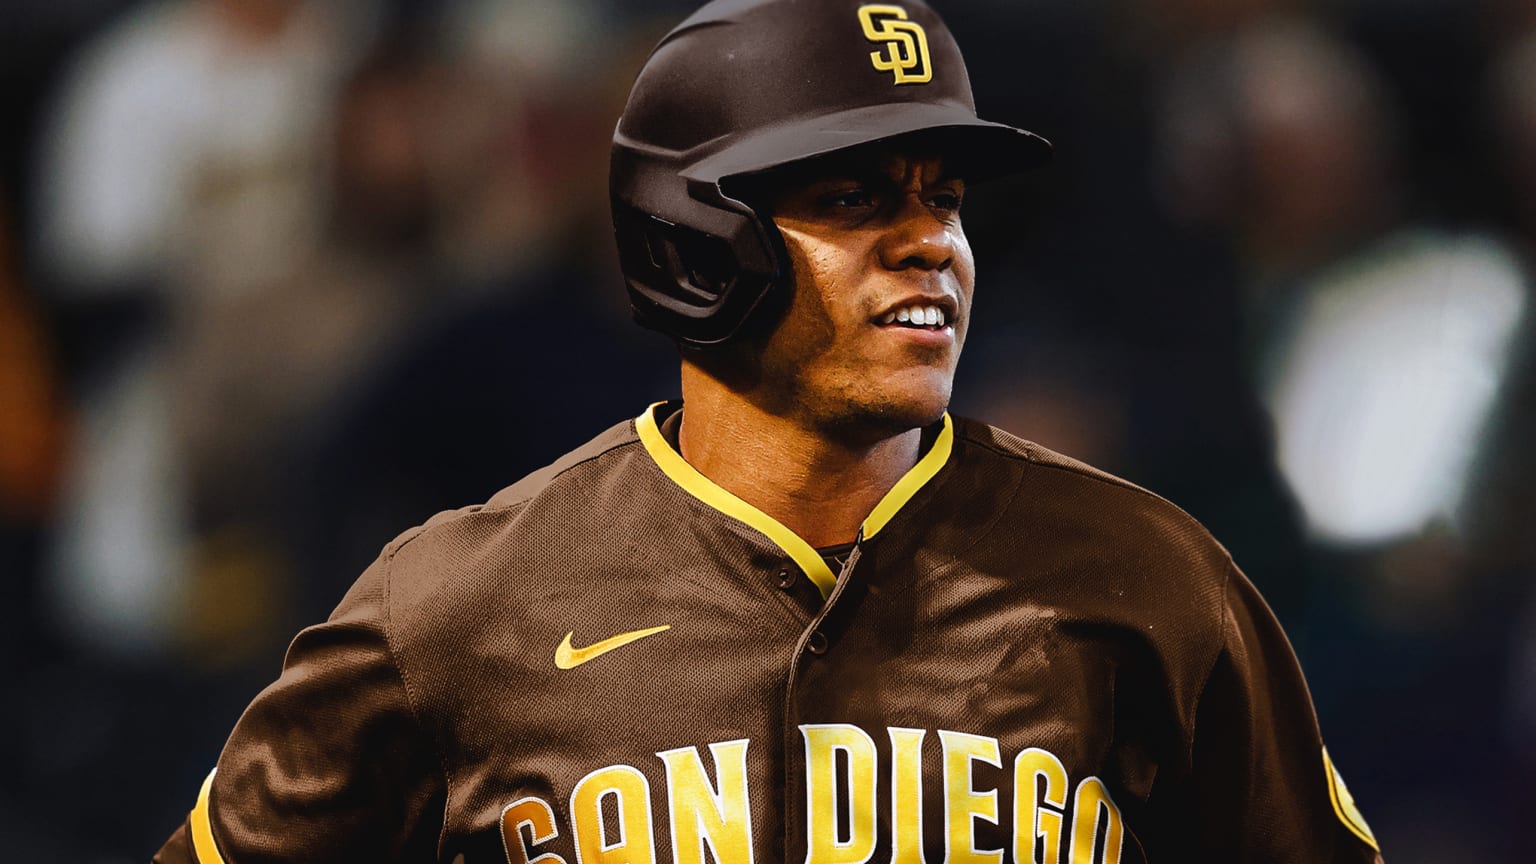 Juan Soto depicted in a Padres helmet and jersey